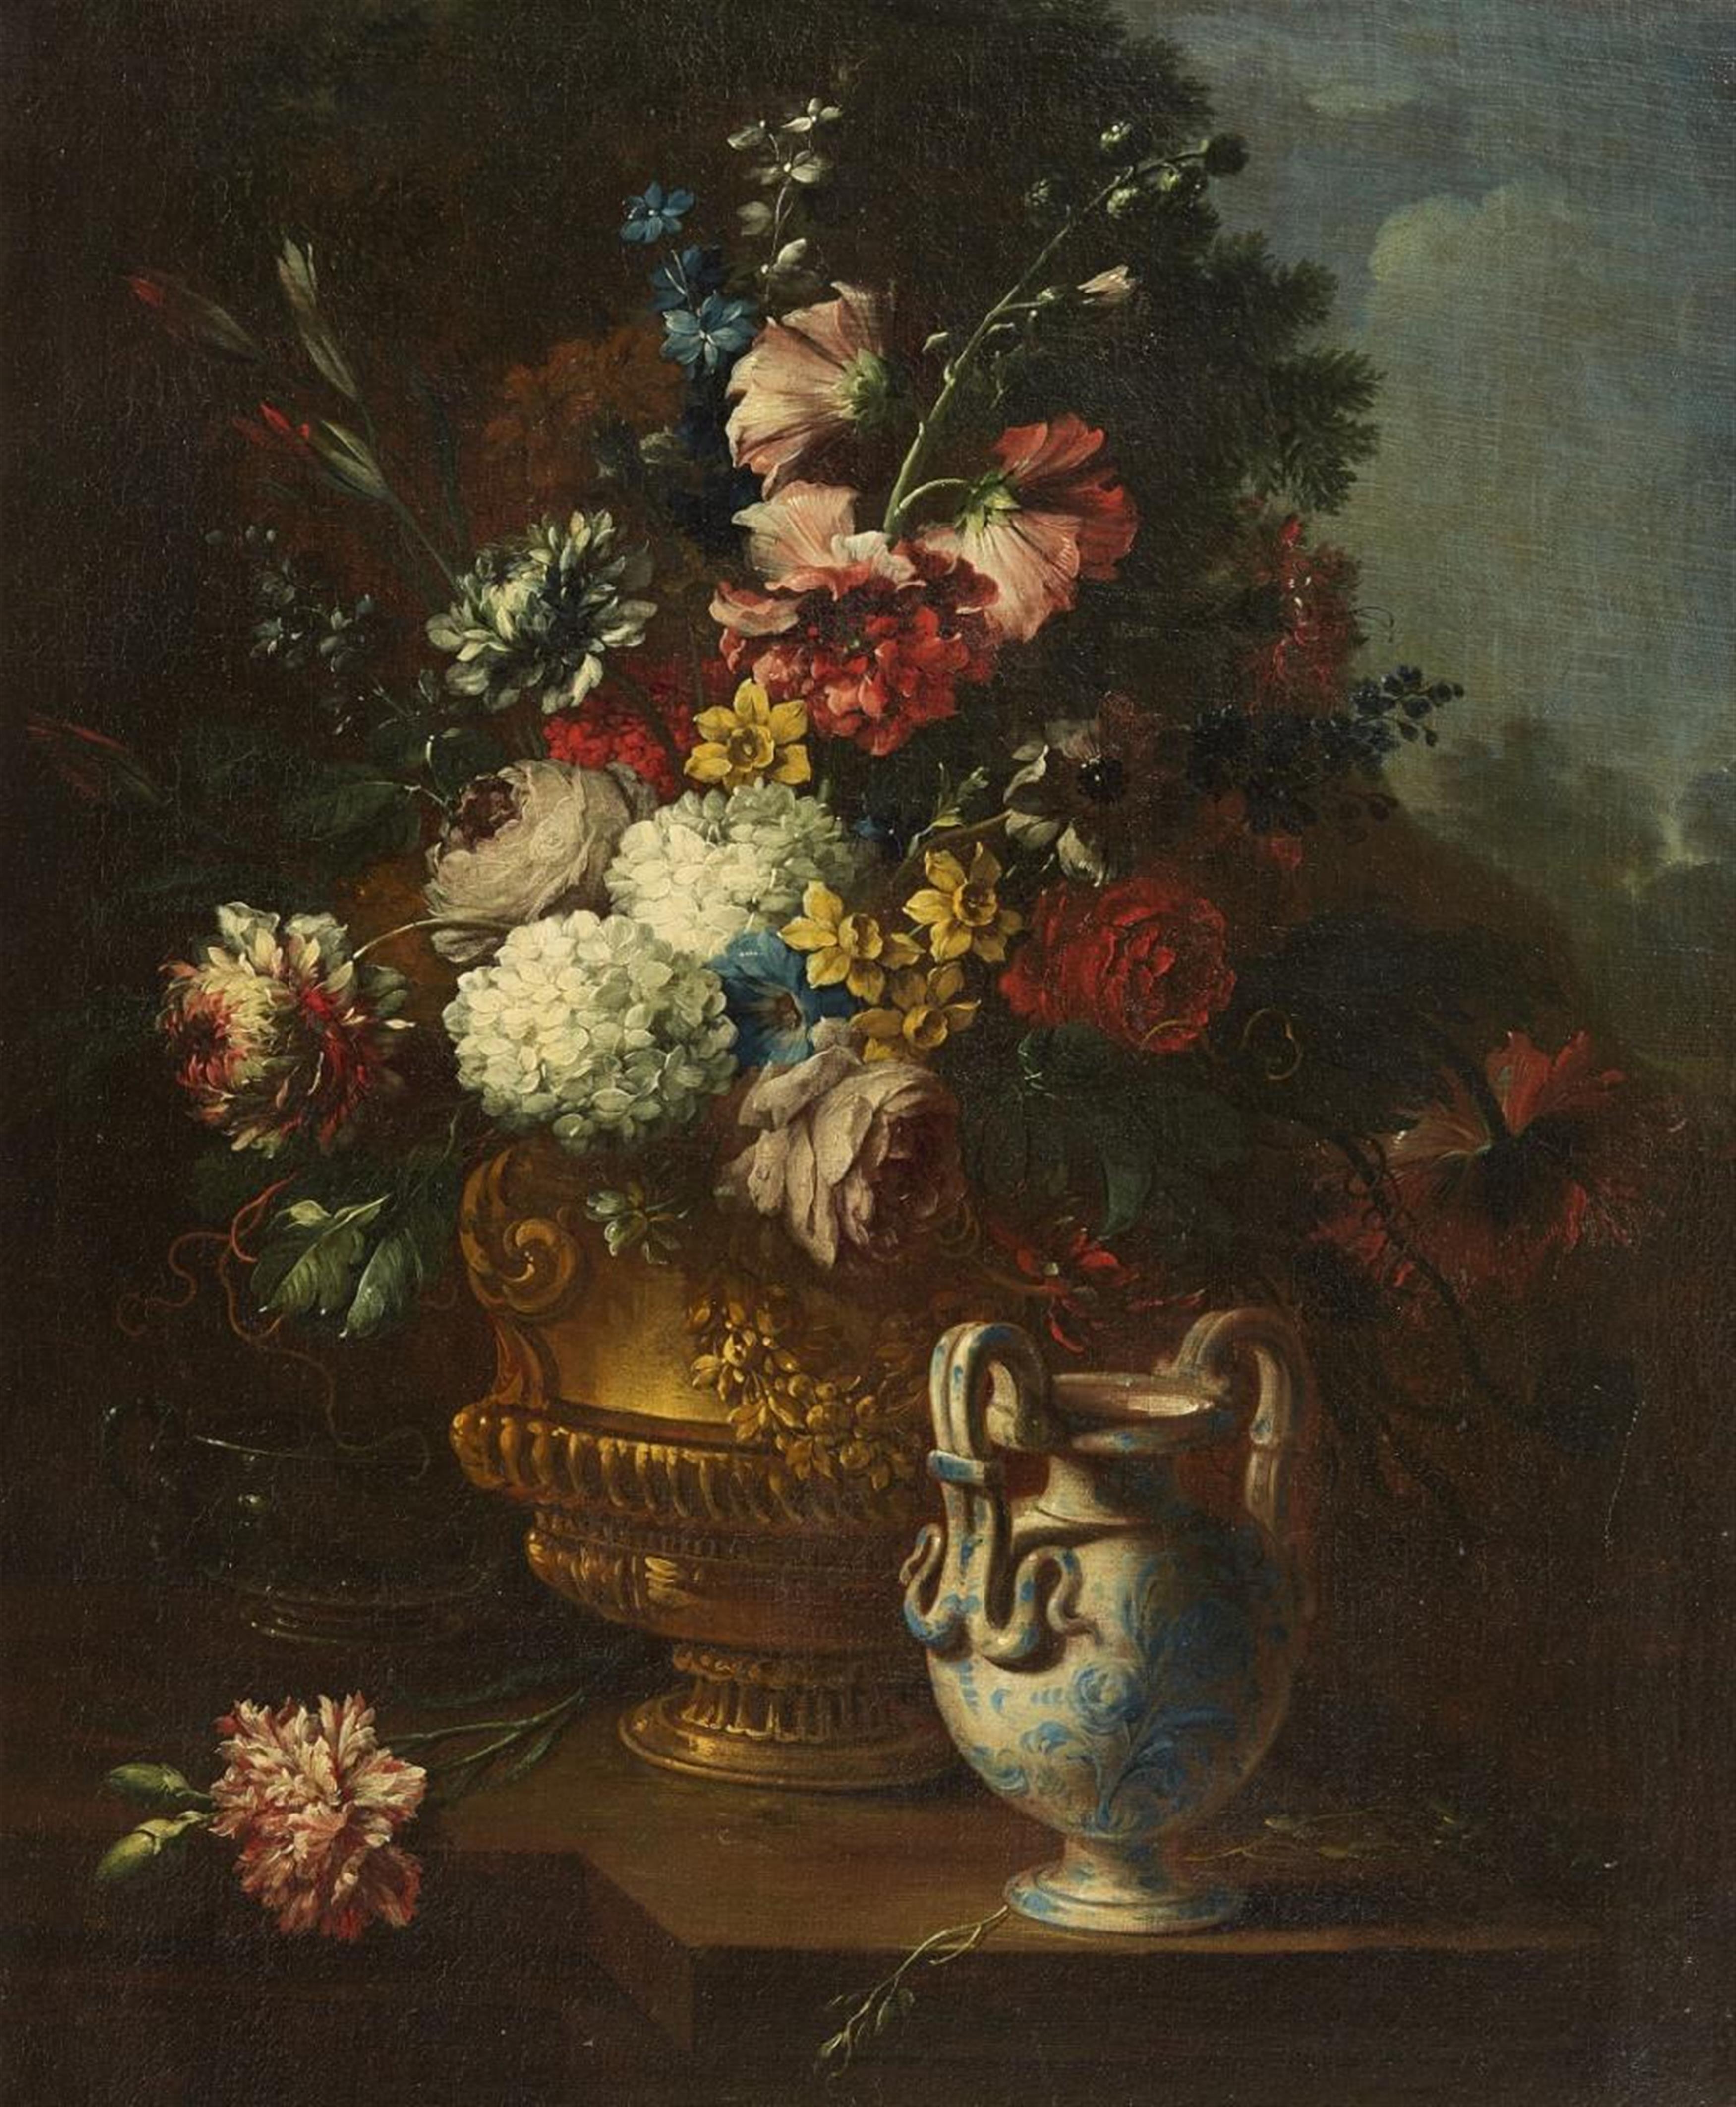 Gaspar Peeter Verbruggen II, attributed to - FLORAL STILL LIFE WITH VIEW OF A LANDSCAPE - image-1